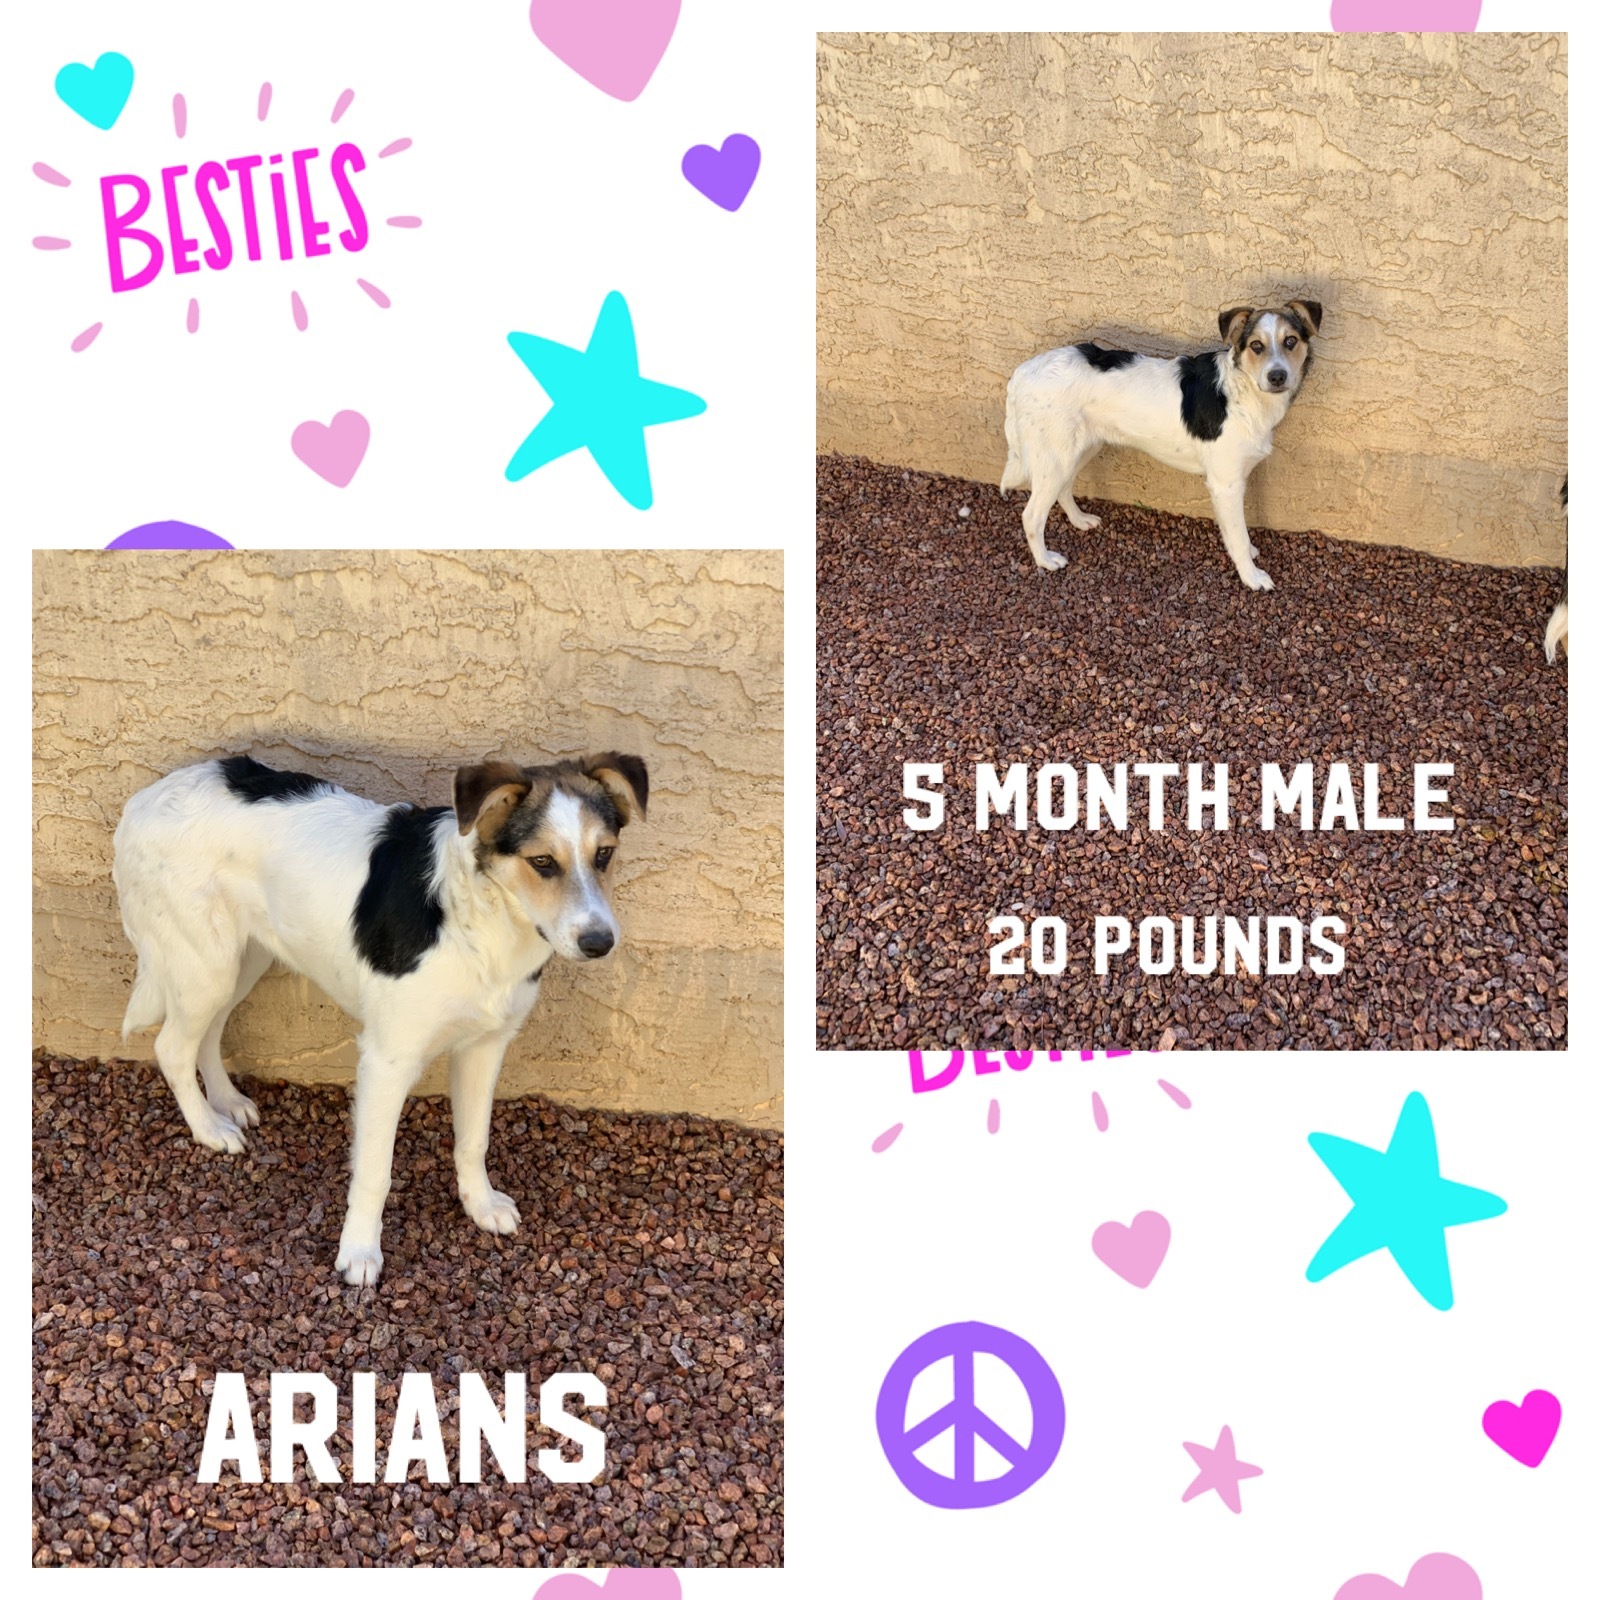 Arians 5 Month Collie Mix Male detail page